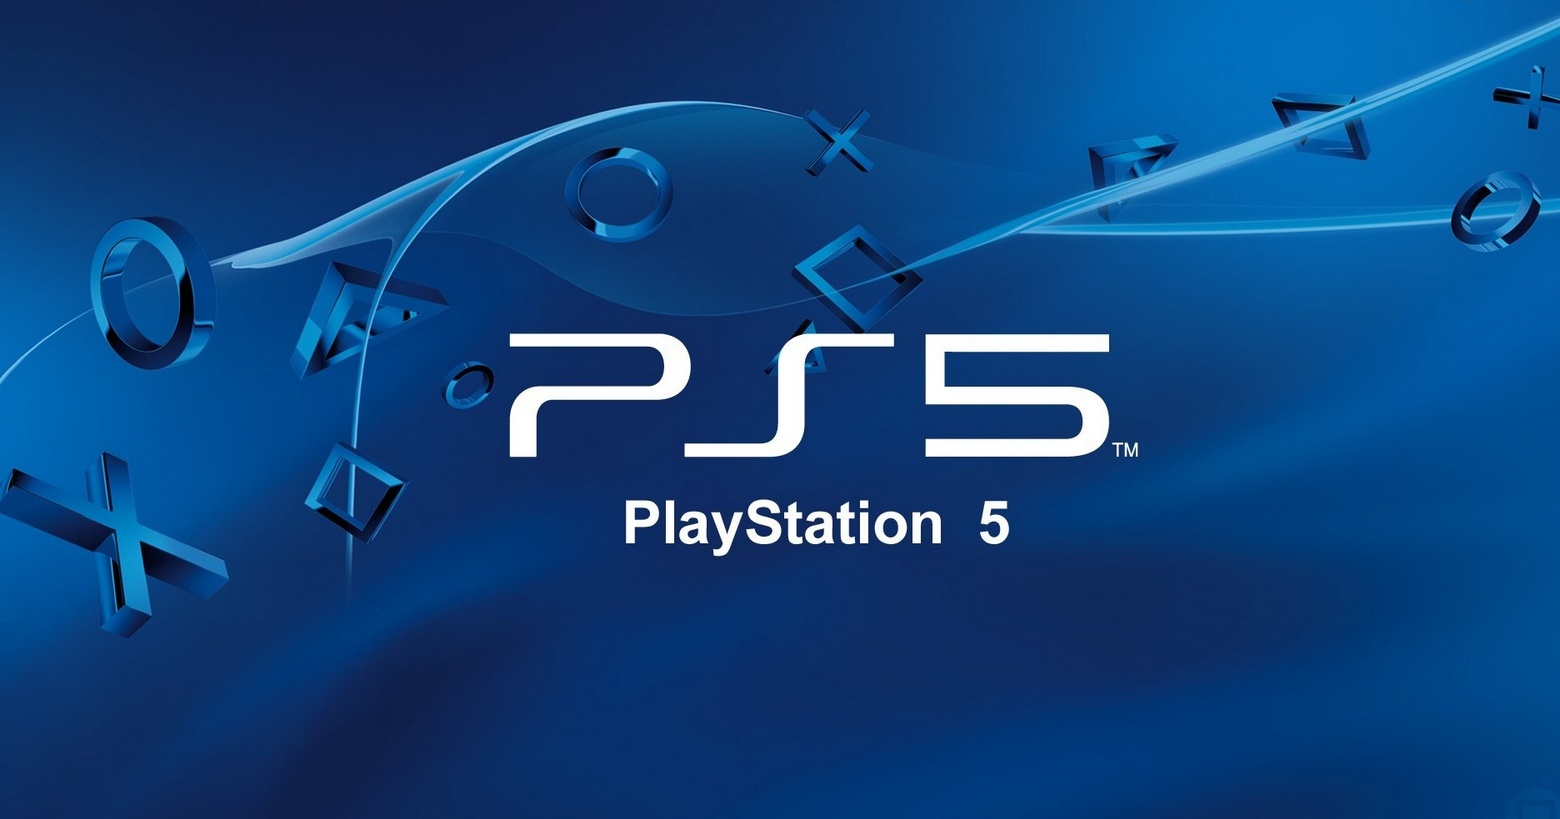 Here we see an image from Sony showing the white logo with the words "PS5" and "PlayStation 5" against a blue background. The background also features several blue-colored primitive shapes such as rhombuses, circles, or triangles that follow a spiraling vortex that runs through the image from the bottom left to the top right. The company is apparently considering integrating NFTs and blockchain technology into PlayStation games.